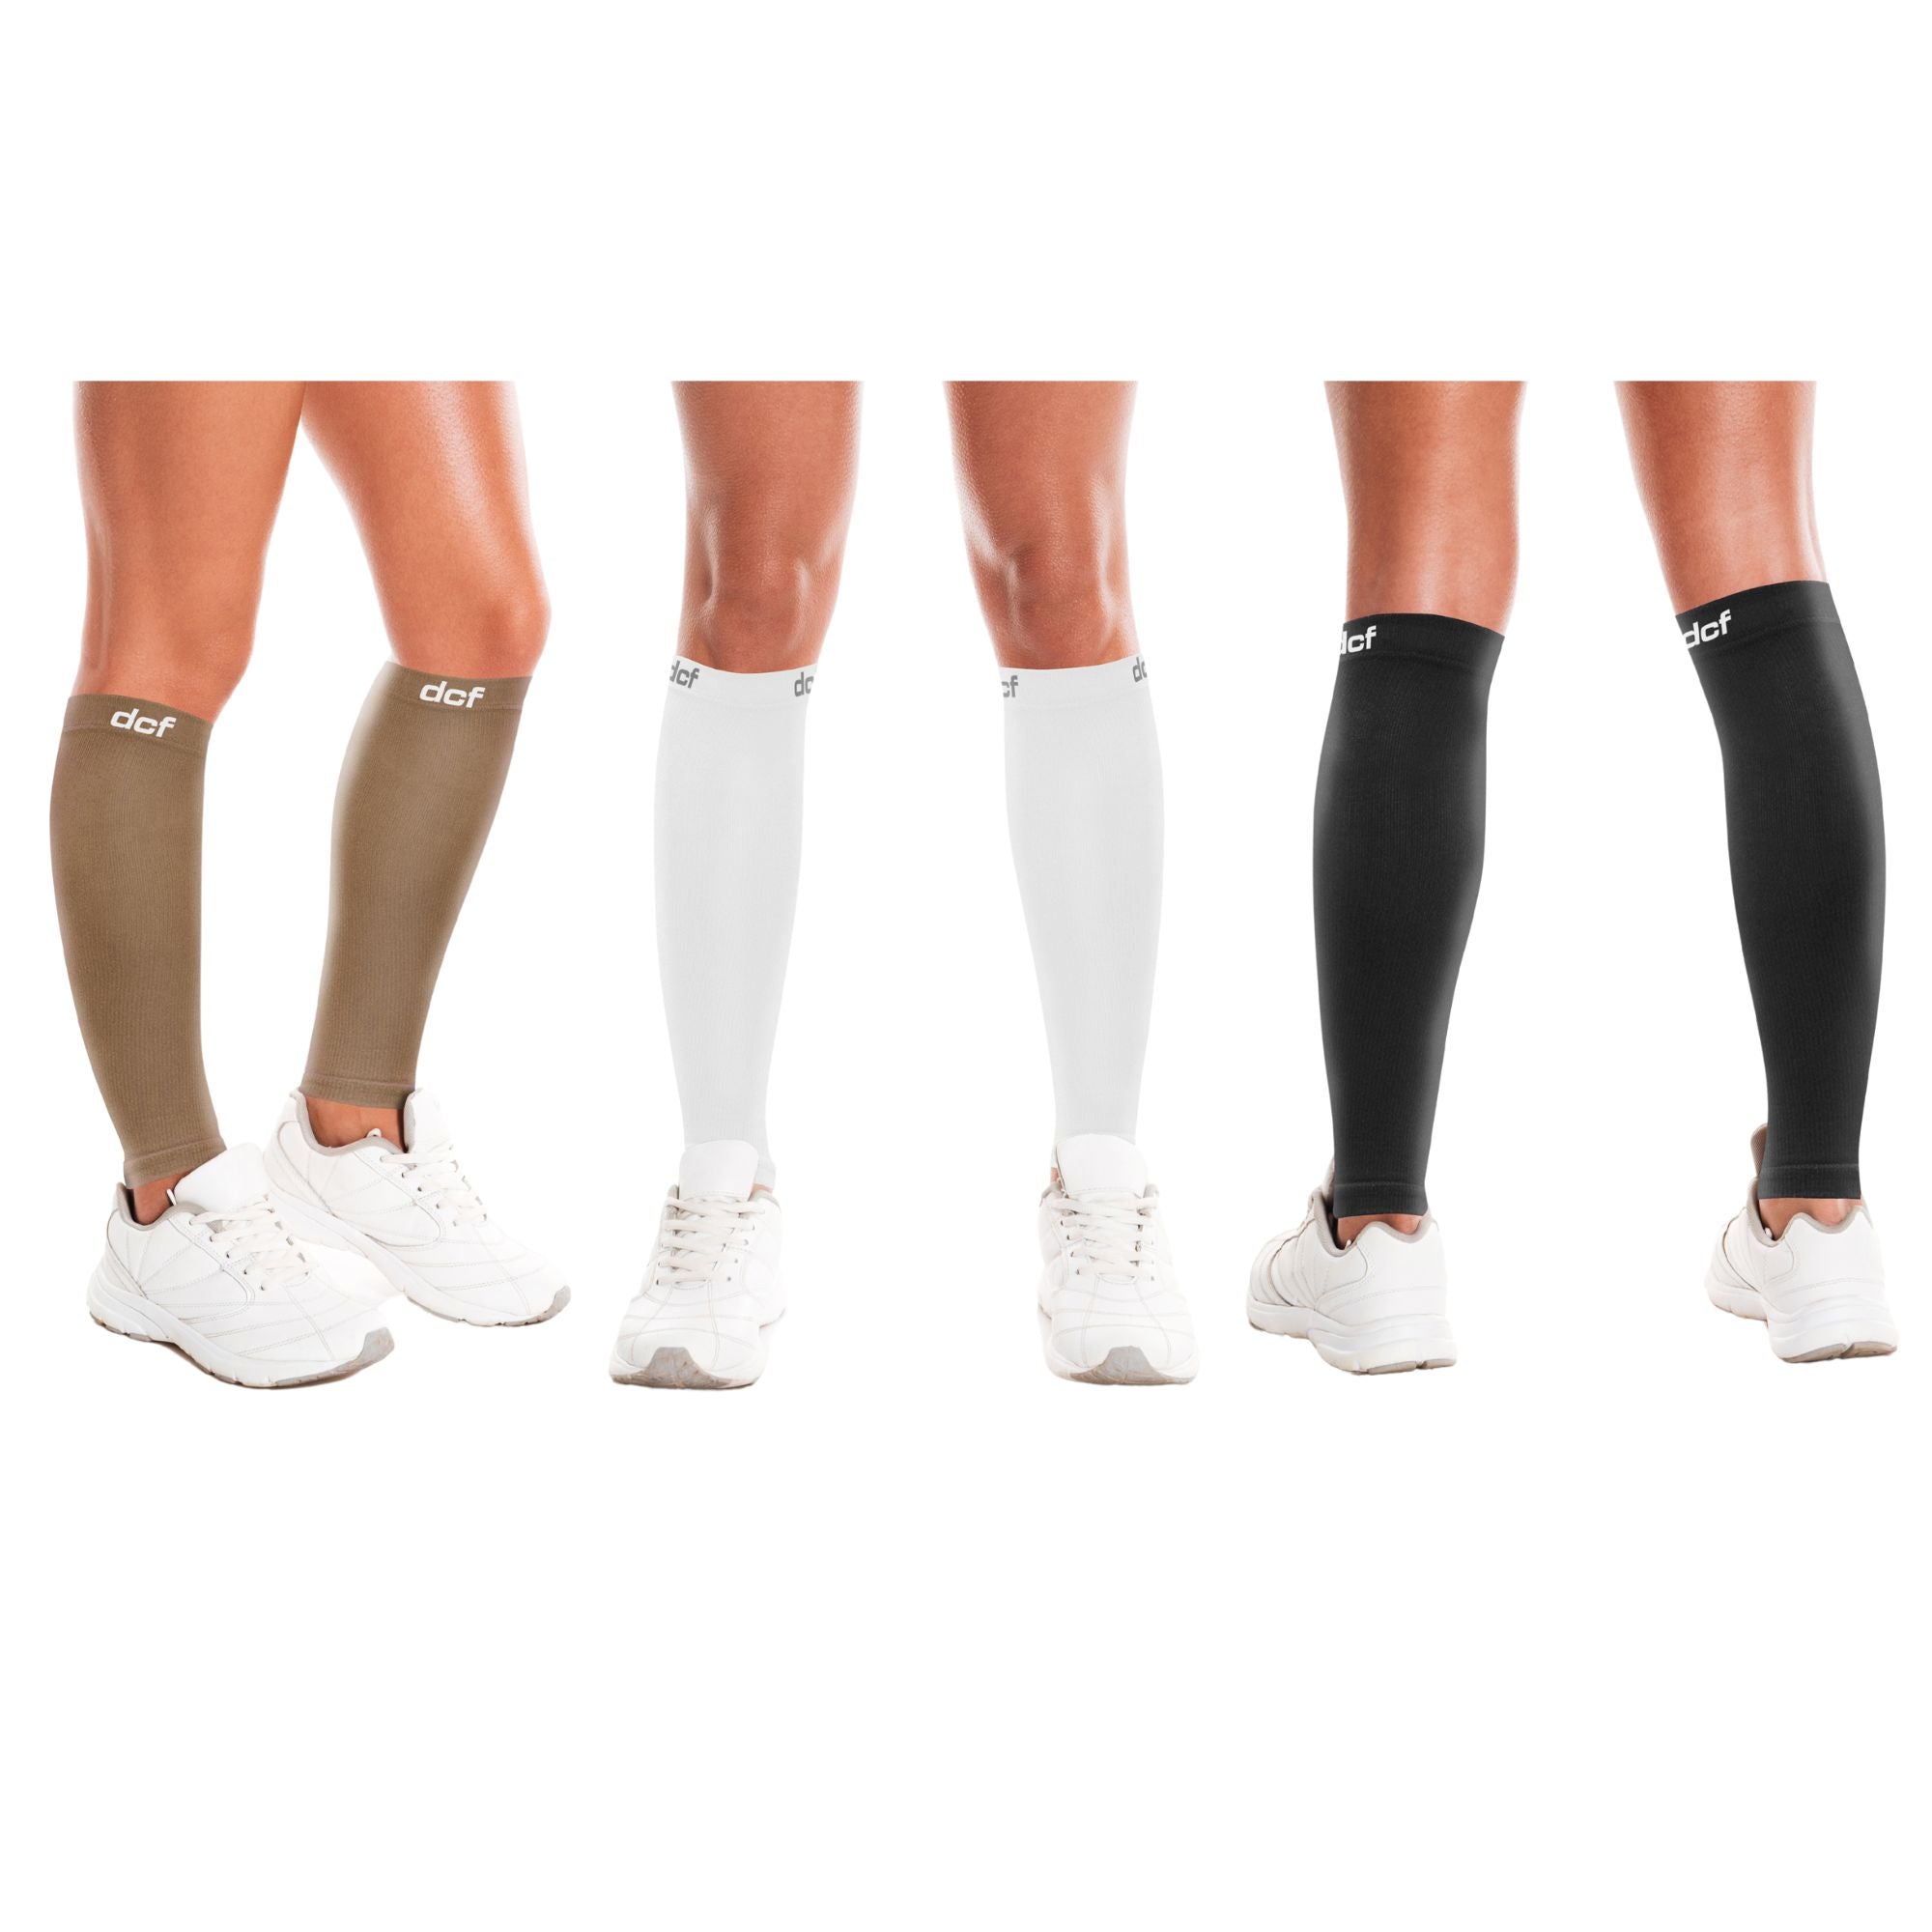  DCF Calf Relief and Performance Compression Sleeve for Men and  Women, Best Calf Compression Sleeve for Running, Calf Pain Relief, leg  warmers Sleeve for Runners (3-Pairs) : Health & Household